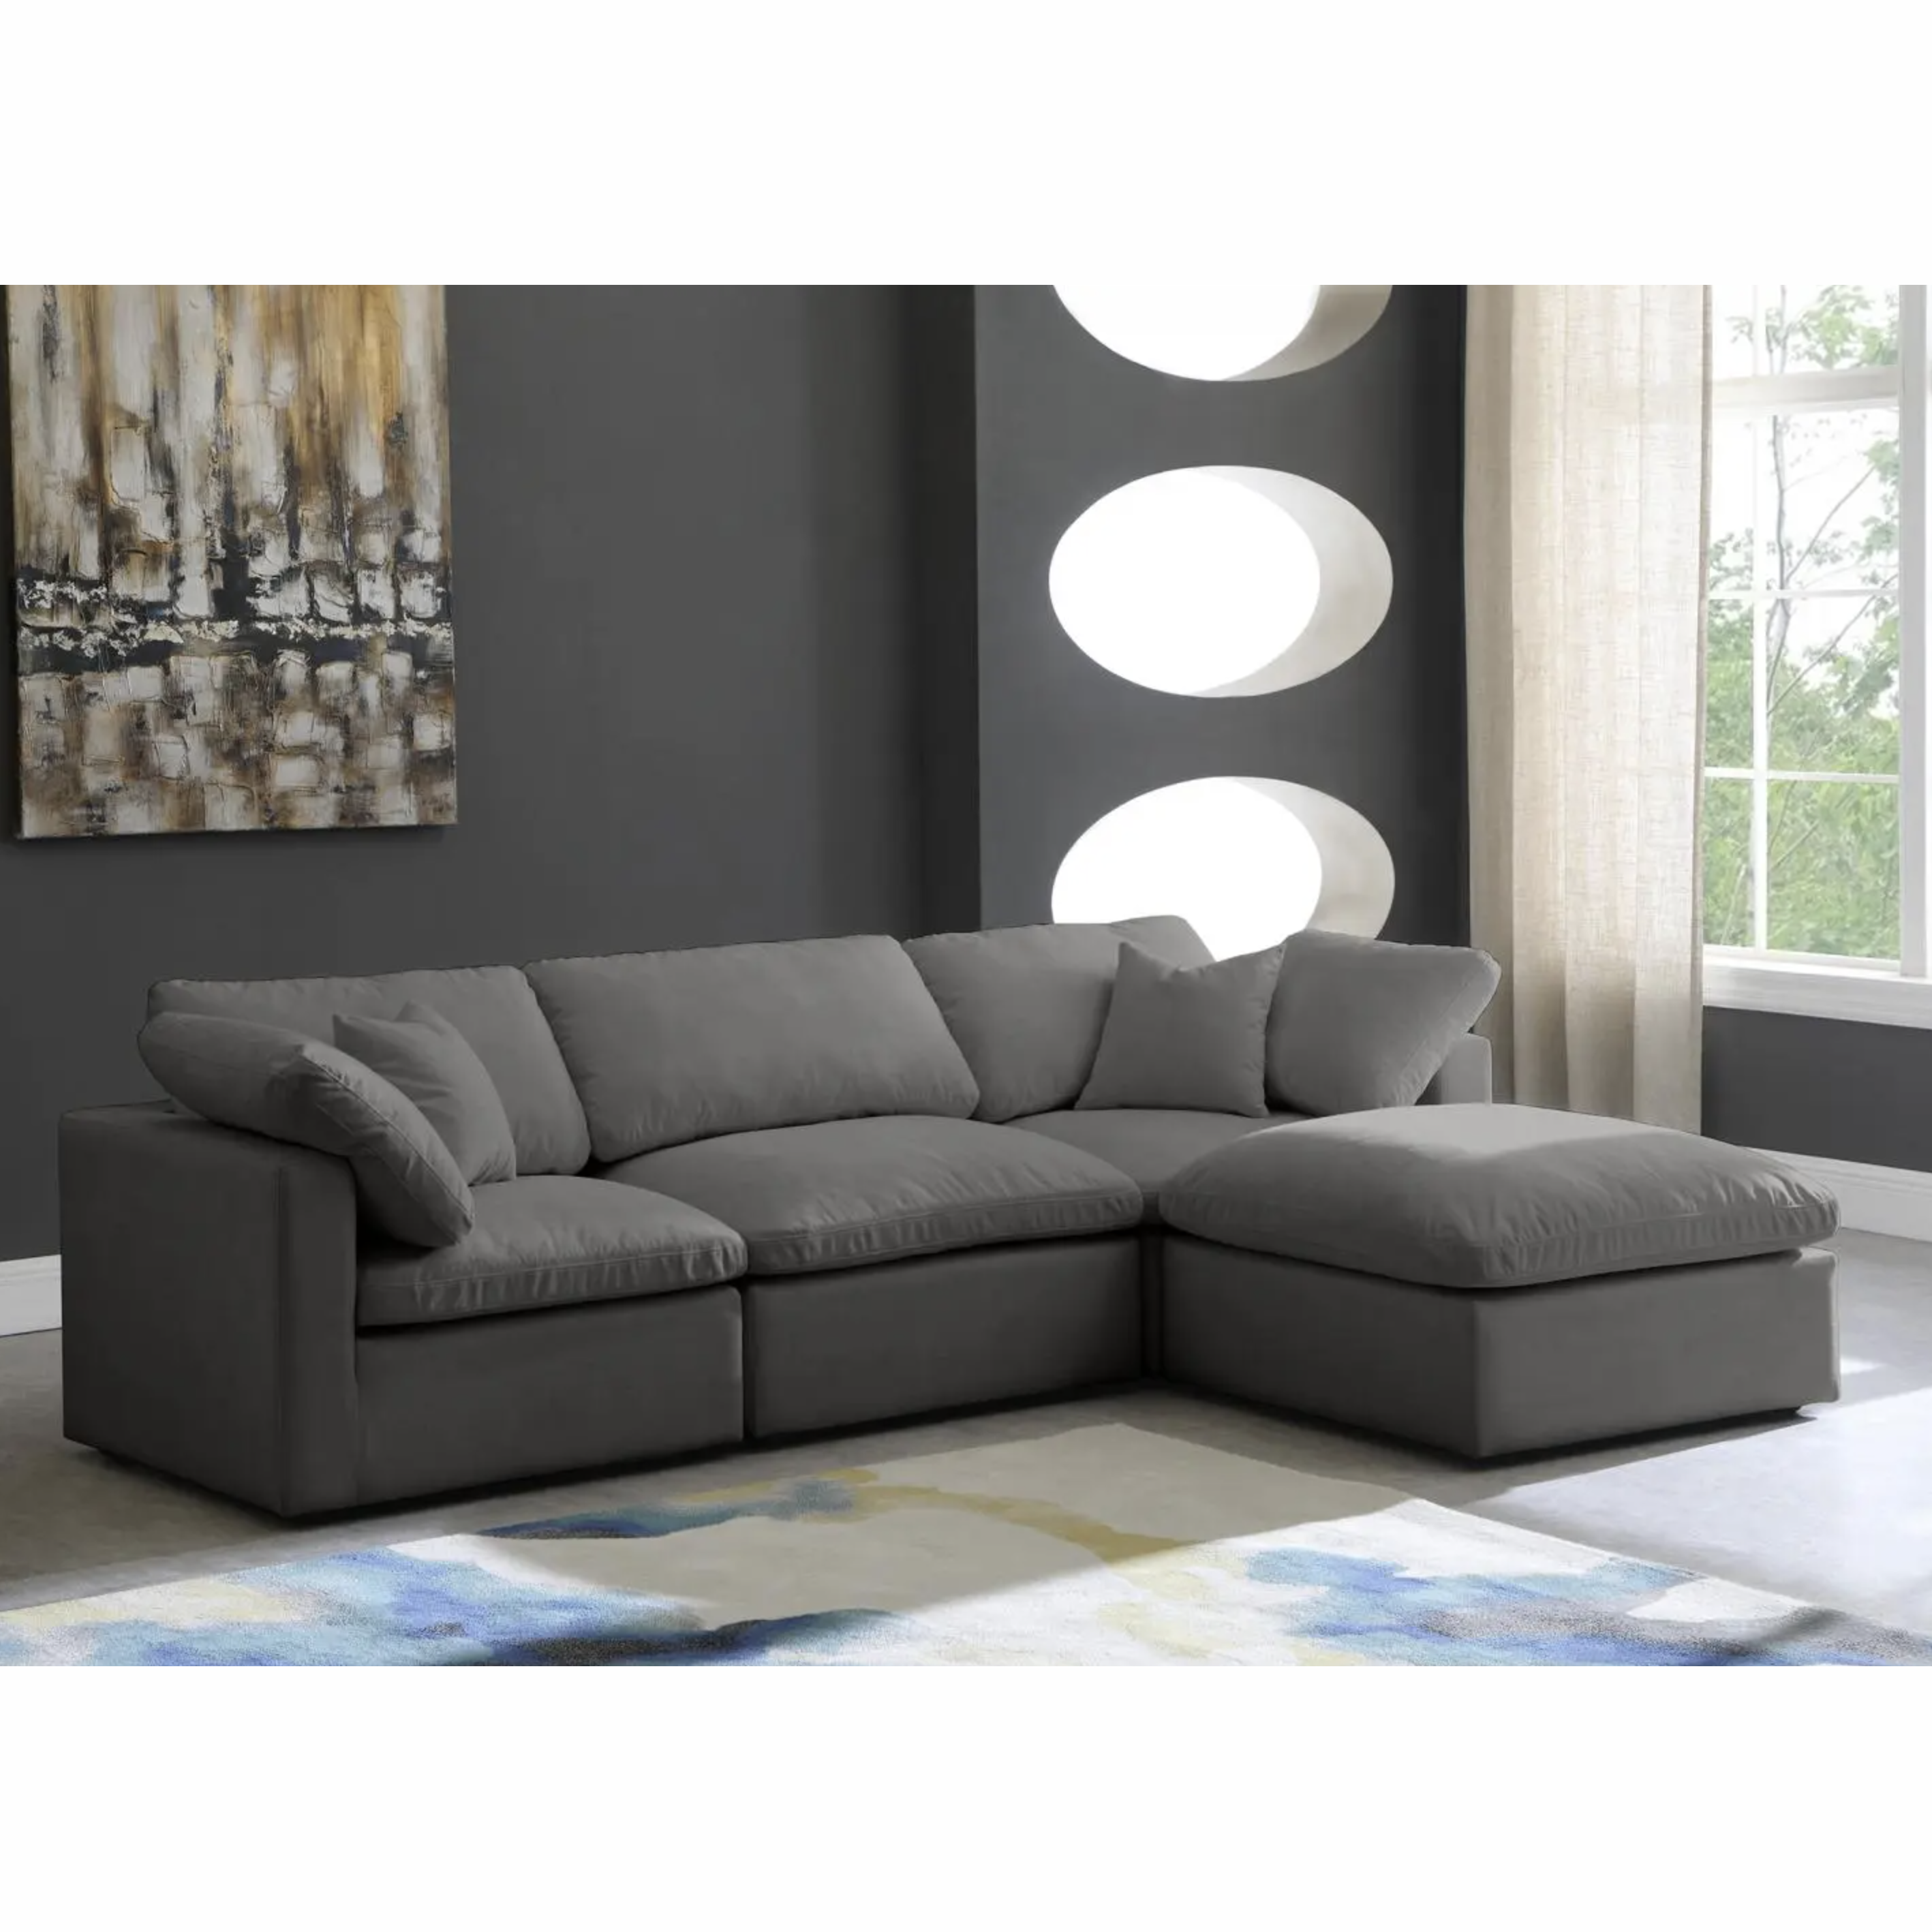 Alluring Sectional Sofa